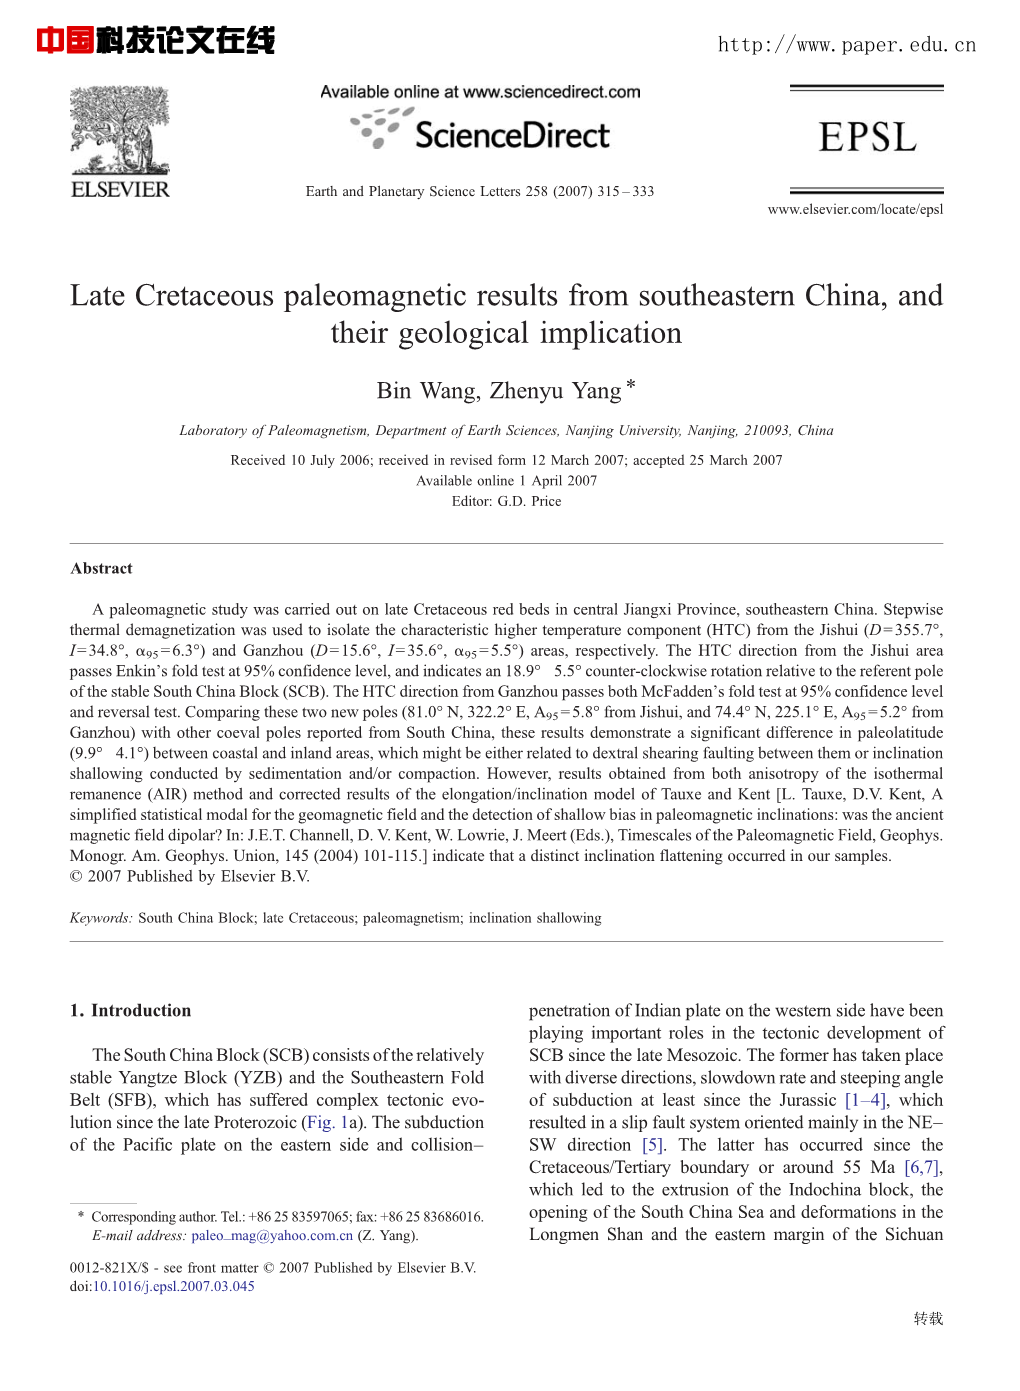 Late Cretaceous Paleomagnetic Results from Southeastern China, and Their Geological Implication ⁎ Bin Wang, Zhenyu Yang